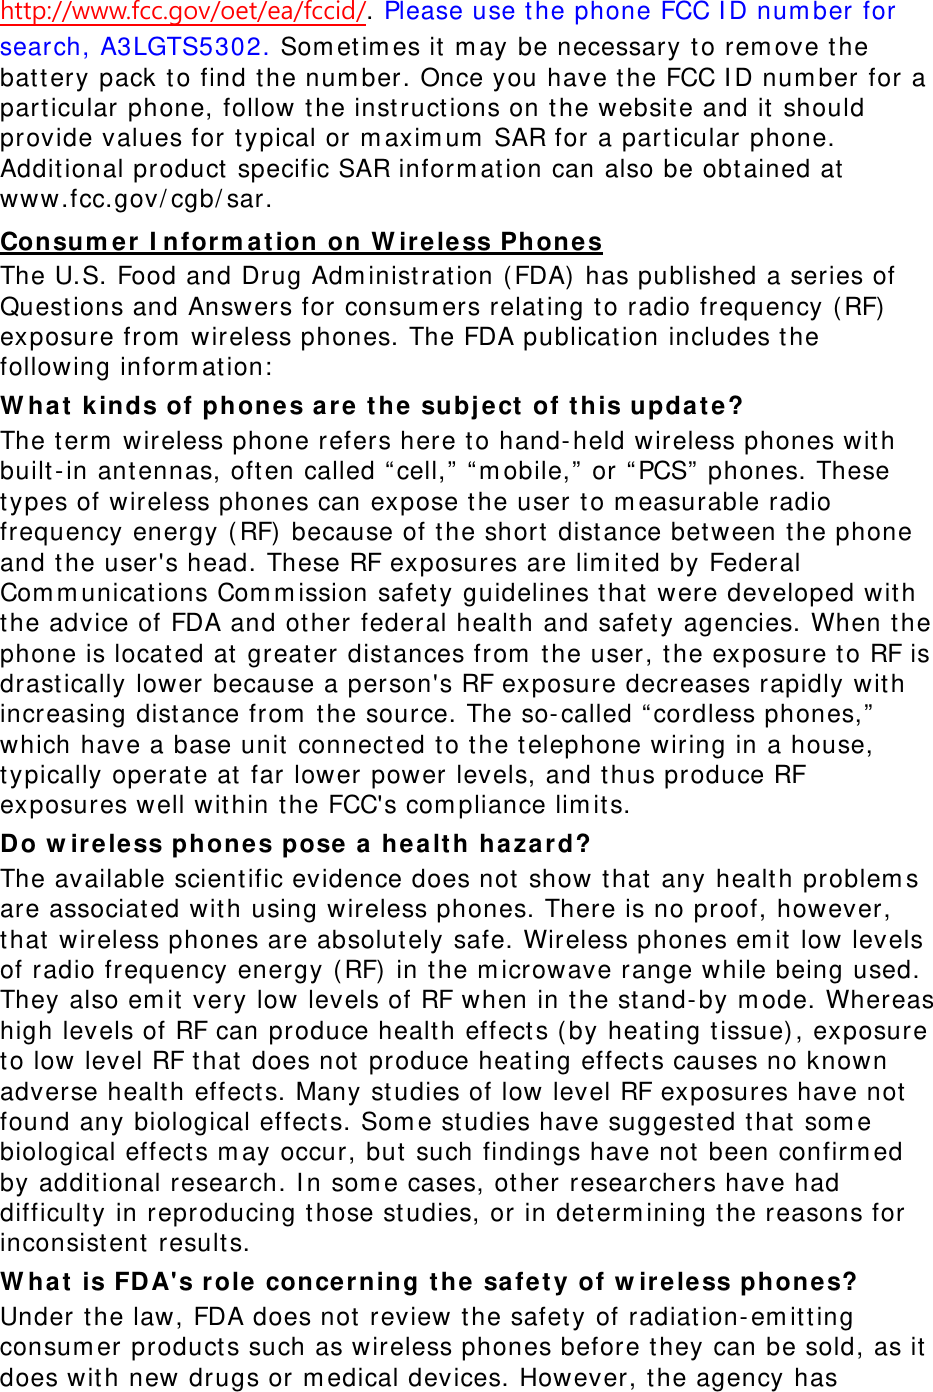 http://www.fcc.gov/oet/ea/fccid/. Please use the phone FCC ID number for search, A3LGTS5302. Sometimes it may be necessary to remove the battery pack to find the number. Once you have the FCC ID number for a particular phone, follow the instructions on the website and it should provide values for typical or maximum SAR for a particular phone. Additional product specific SAR information can also be obtained at www.fcc.gov/cgb/sar. Consumer Information on Wireless Phones The U.S. Food and Drug Administration (FDA) has published a series of Questions and Answers for consumers relating to radio frequency (RF) exposure from wireless phones. The FDA publication includes the following information: What kinds of phones are the subject of this update? The term wireless phone refers here to hand-held wireless phones with built-in antennas, often called “cell,” “mobile,” or “PCS” phones. These types of wireless phones can expose the user to measurable radio frequency energy (RF) because of the short distance between the phone and the user&apos;s head. These RF exposures are limited by Federal Communications Commission safety guidelines that were developed with the advice of FDA and other federal health and safety agencies. When the phone is located at greater distances from the user, the exposure to RF is drastically lower because a person&apos;s RF exposure decreases rapidly with increasing distance from the source. The so-called “cordless phones,” which have a base unit connected to the telephone wiring in a house, typically operate at far lower power levels, and thus produce RF exposures well within the FCC&apos;s compliance limits. Do wireless phones pose a health hazard? The available scientific evidence does not show that any health problems are associated with using wireless phones. There is no proof, however, that wireless phones are absolutely safe. Wireless phones emit low levels of radio frequency energy (RF) in the microwave range while being used. They also emit very low levels of RF when in the stand-by mode. Whereas high levels of RF can produce health effects (by heating tissue), exposure to low level RF that does not produce heating effects causes no known adverse health effects. Many studies of low level RF exposures have not found any biological effects. Some studies have suggested that some biological effects may occur, but such findings have not been confirmed by additional research. In some cases, other researchers have had difficulty in reproducing those studies, or in determining the reasons for inconsistent results. What is FDA&apos;s role concerning the safety of wireless phones? Under the law, FDA does not review the safety of radiation-emitting consumer products such as wireless phones before they can be sold, as it does with new drugs or medical devices. However, the agency has 